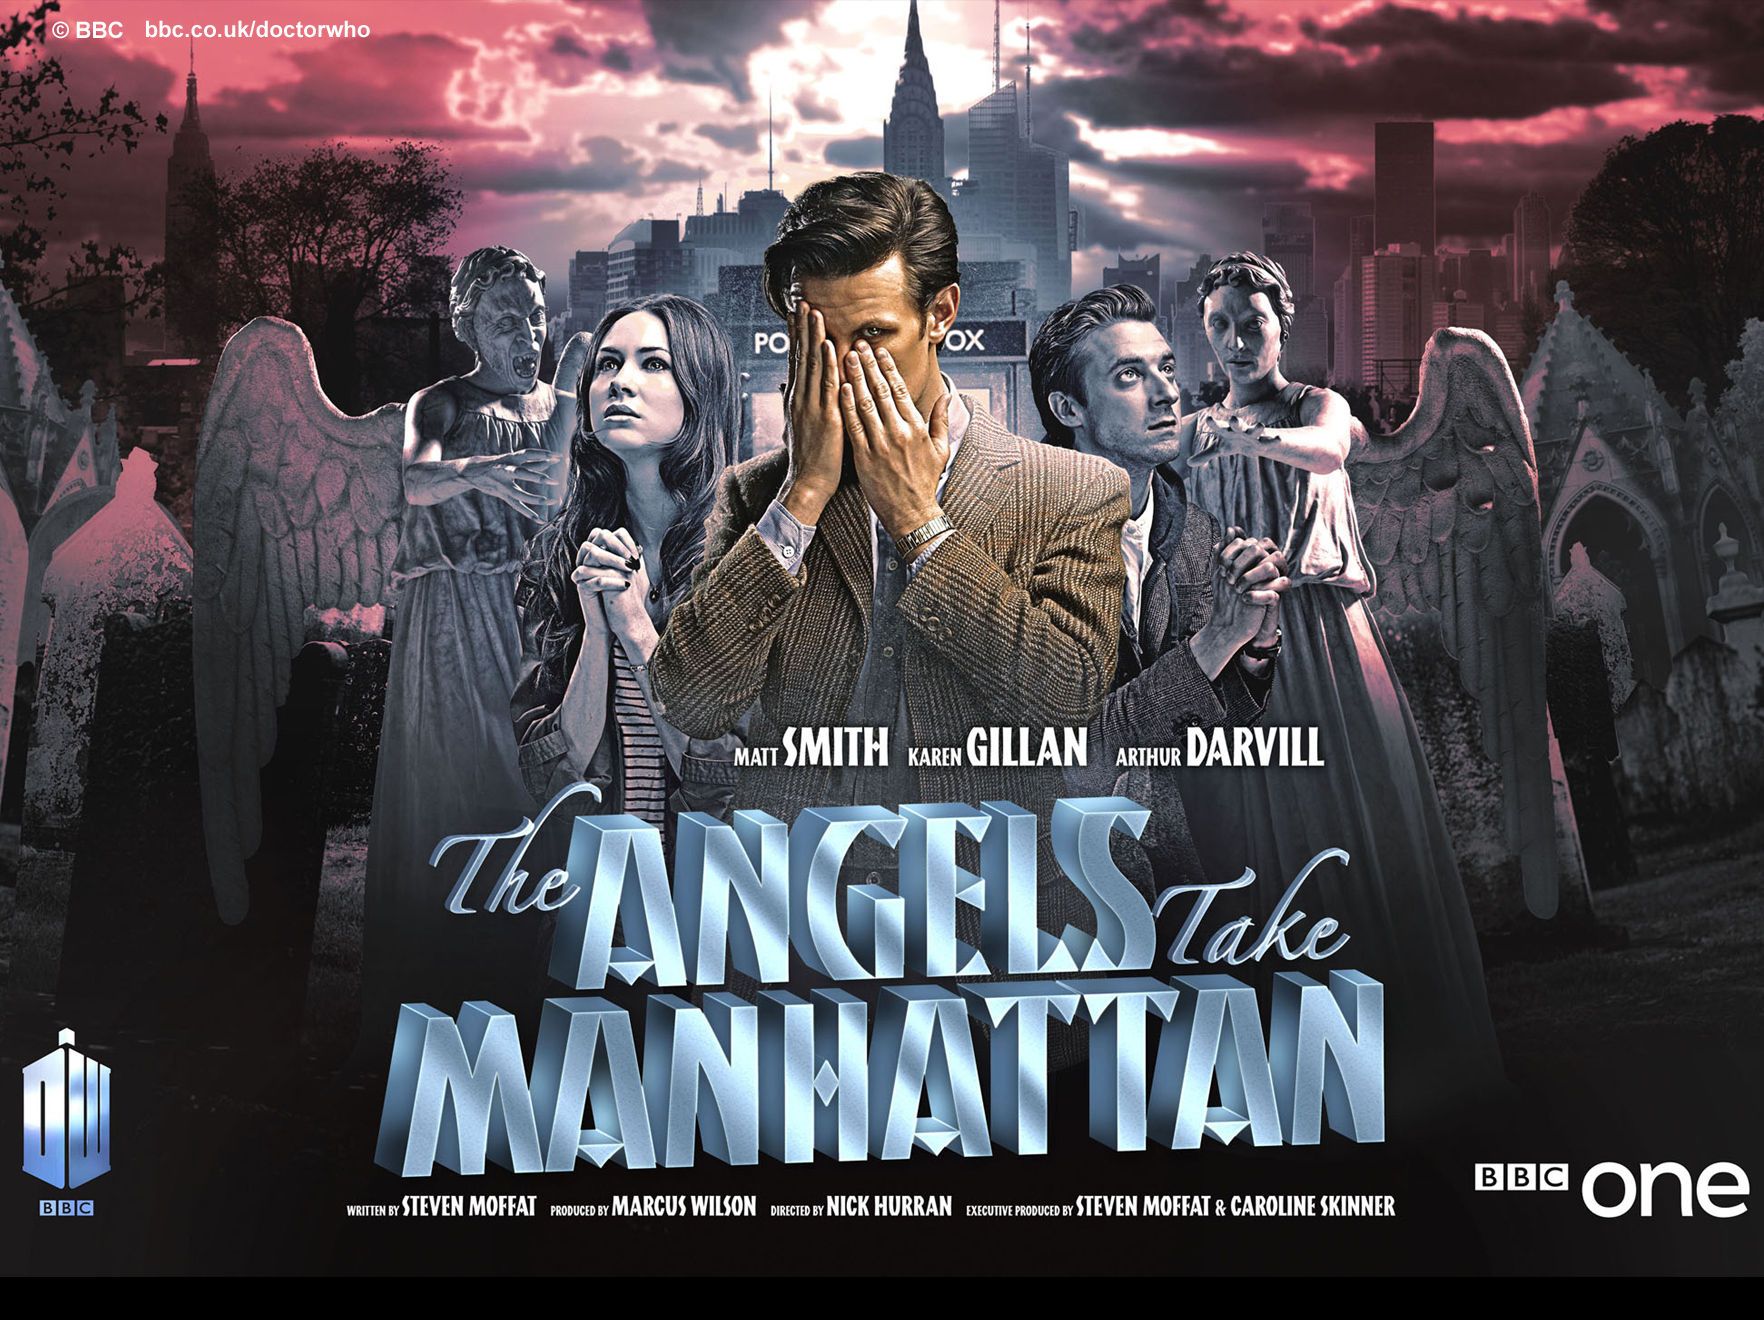 Doctor Who Episode Poster - The Angels Take Manhattan